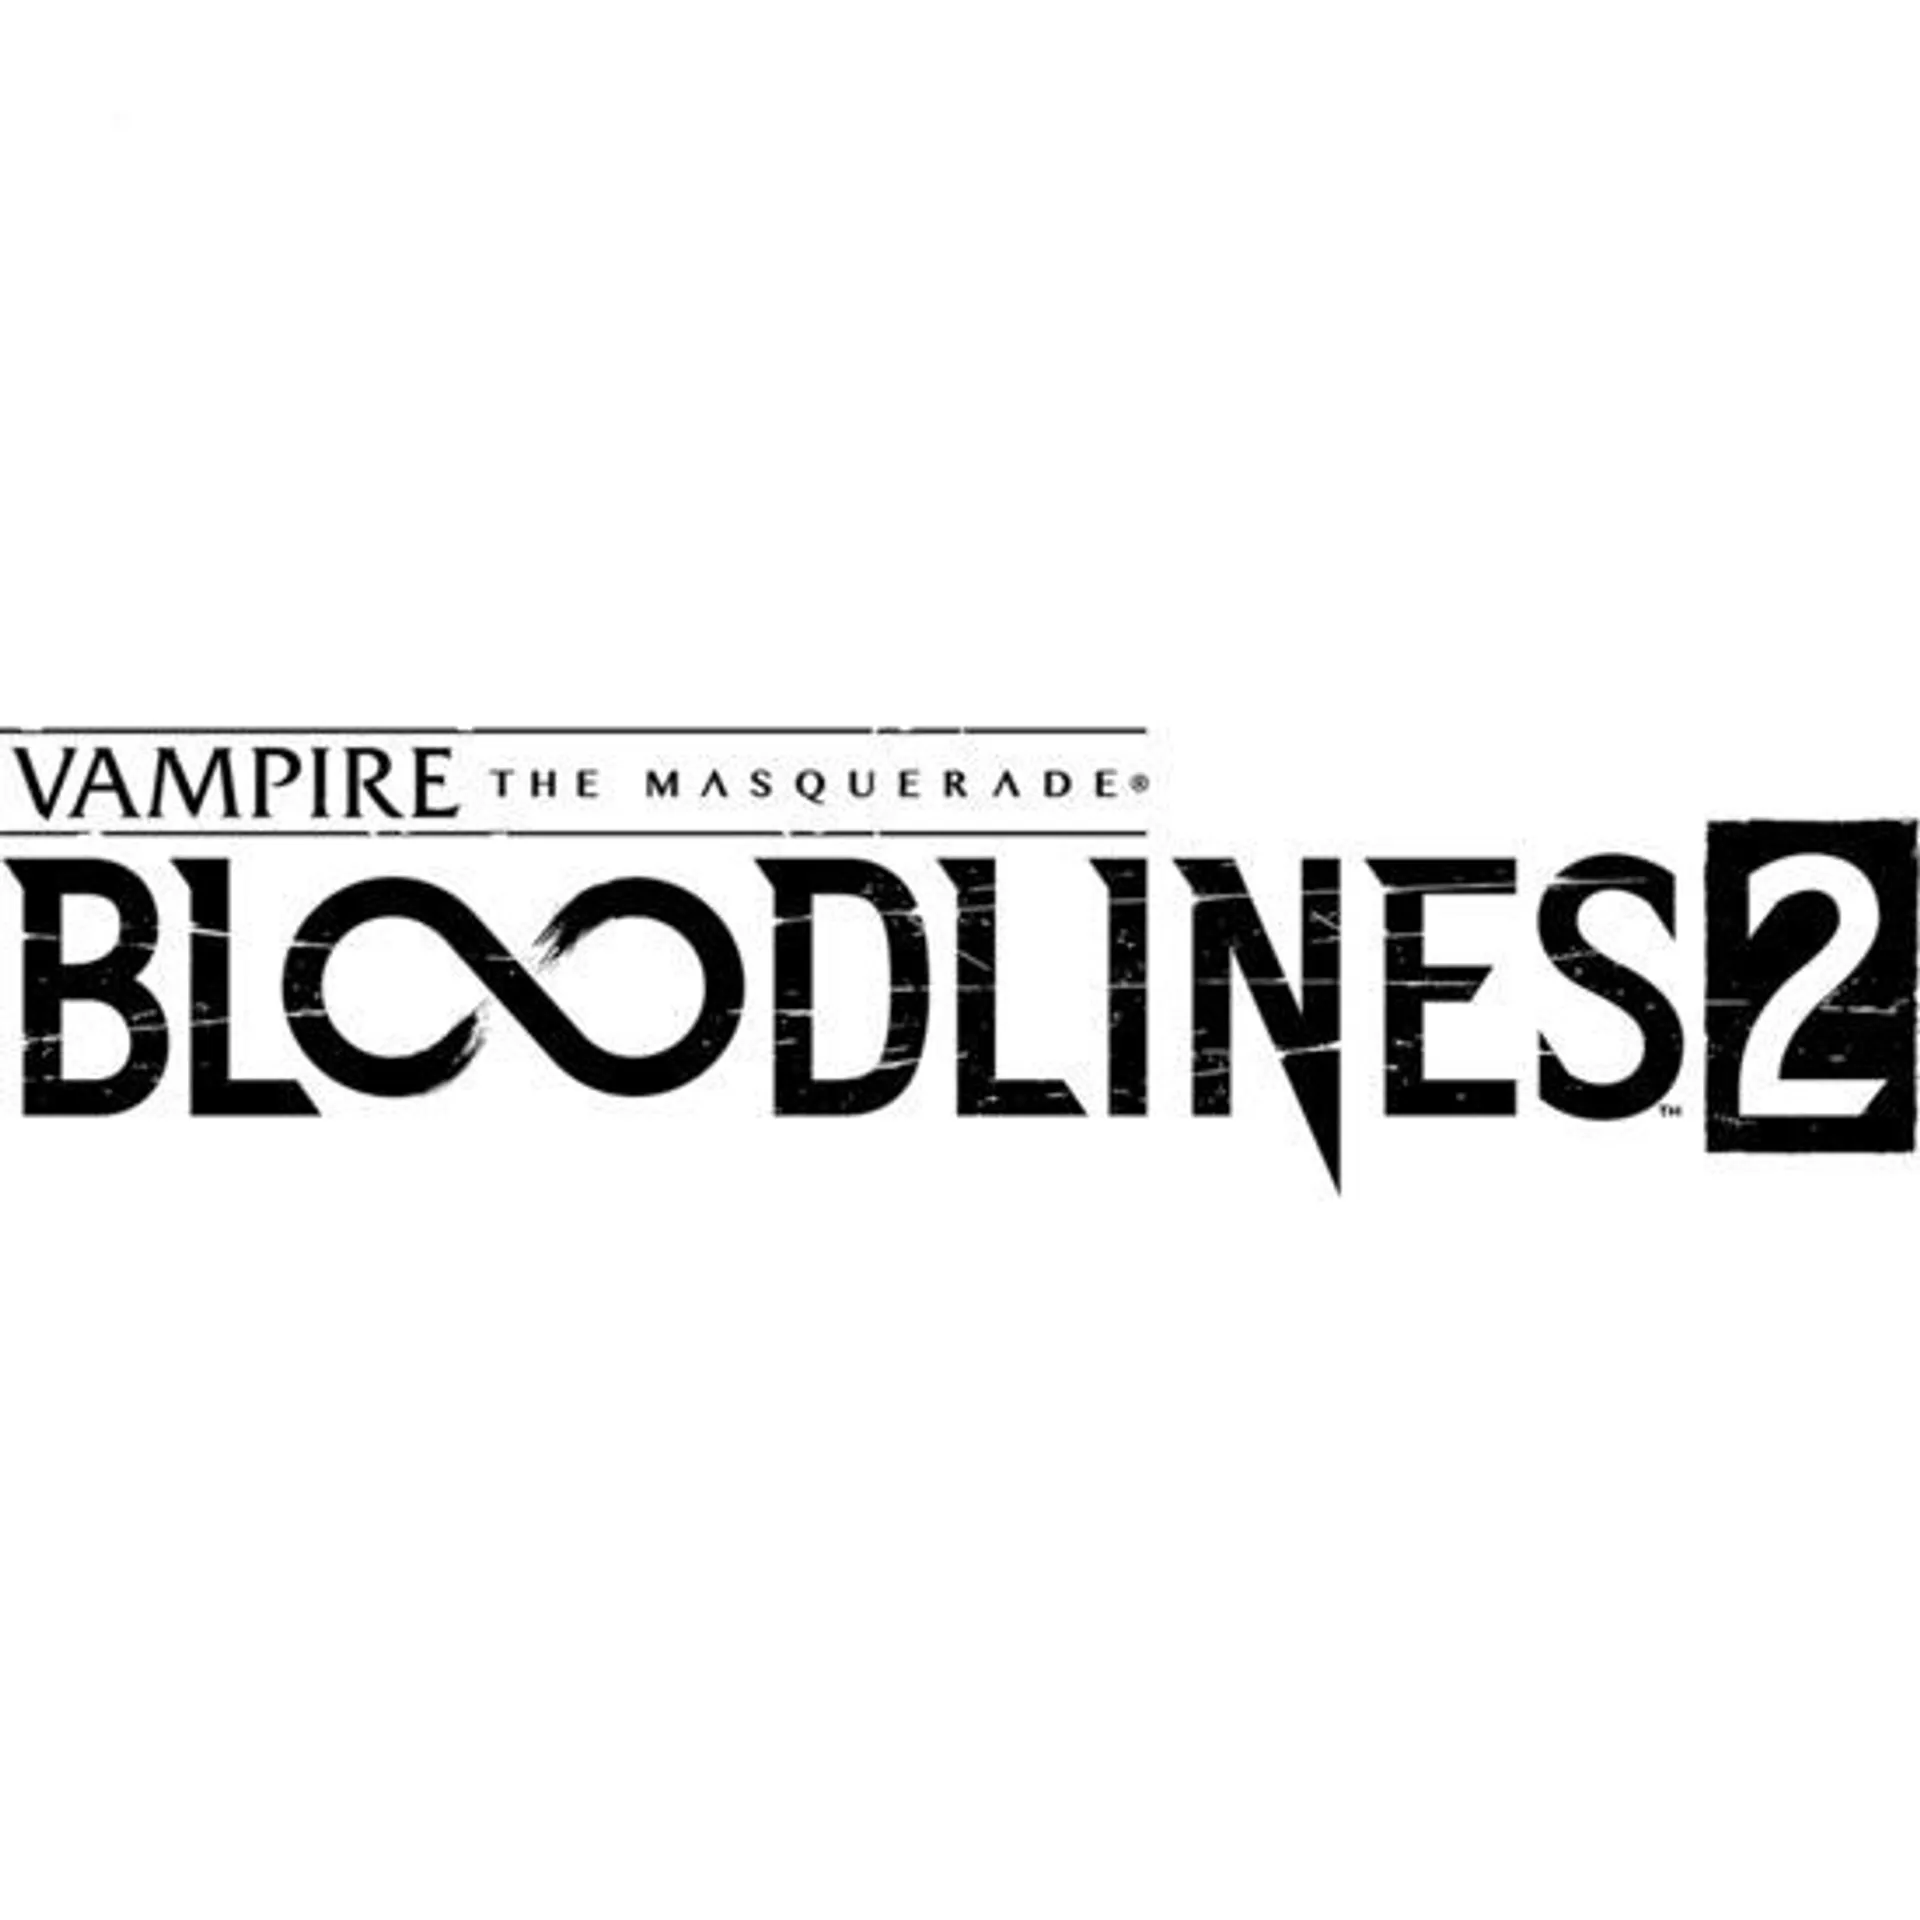 Vampire: The Masquerade Bloodlines 2 Unsanctioned Edition